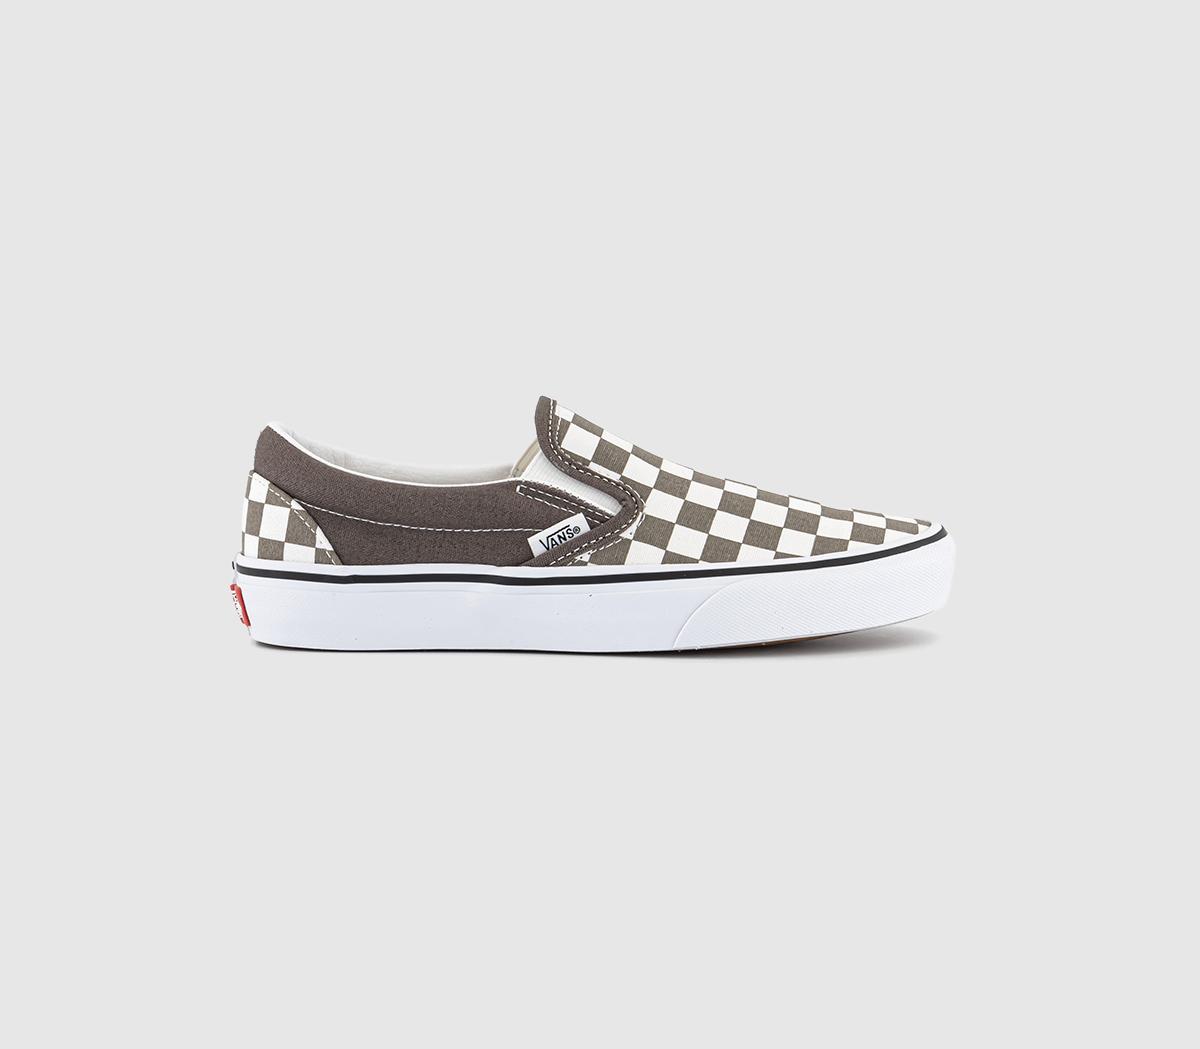 VansVans Classic Slip On TrainersColor Theory Checkerboard Bungee Cord